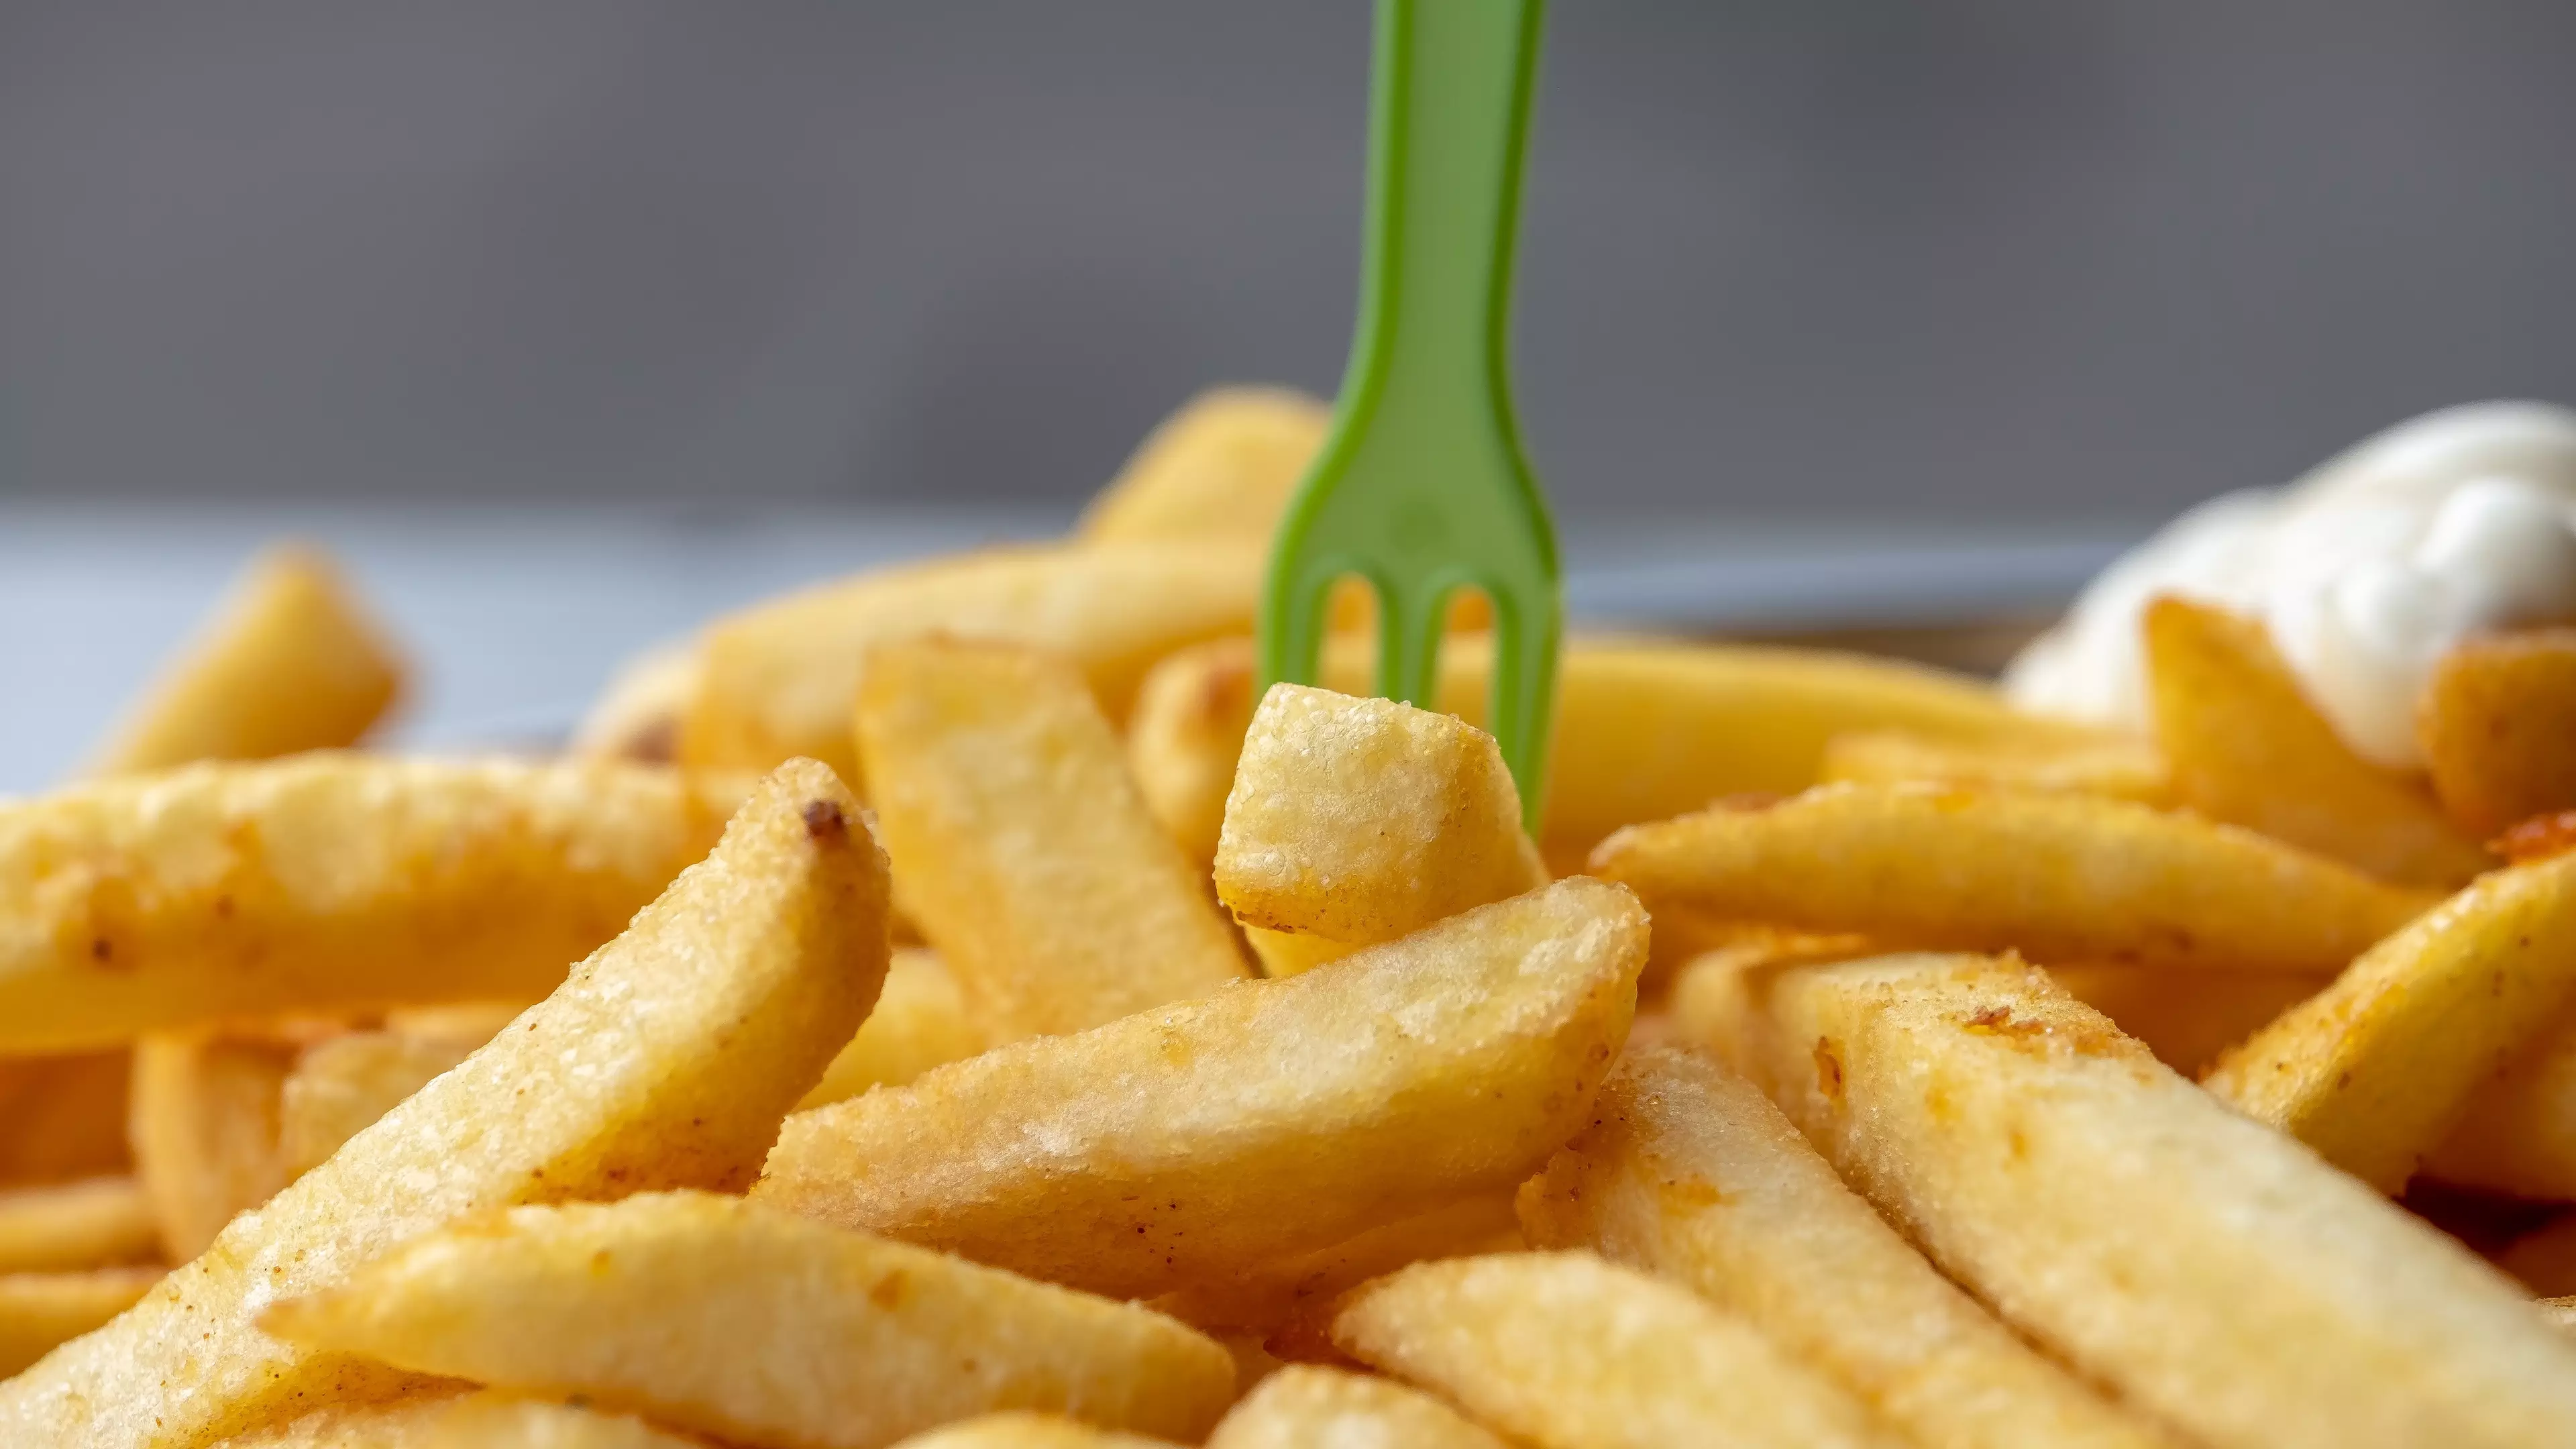 Twitter Users In Furious Debate Over Whether To Put Salt Or Vinegar On Chips First